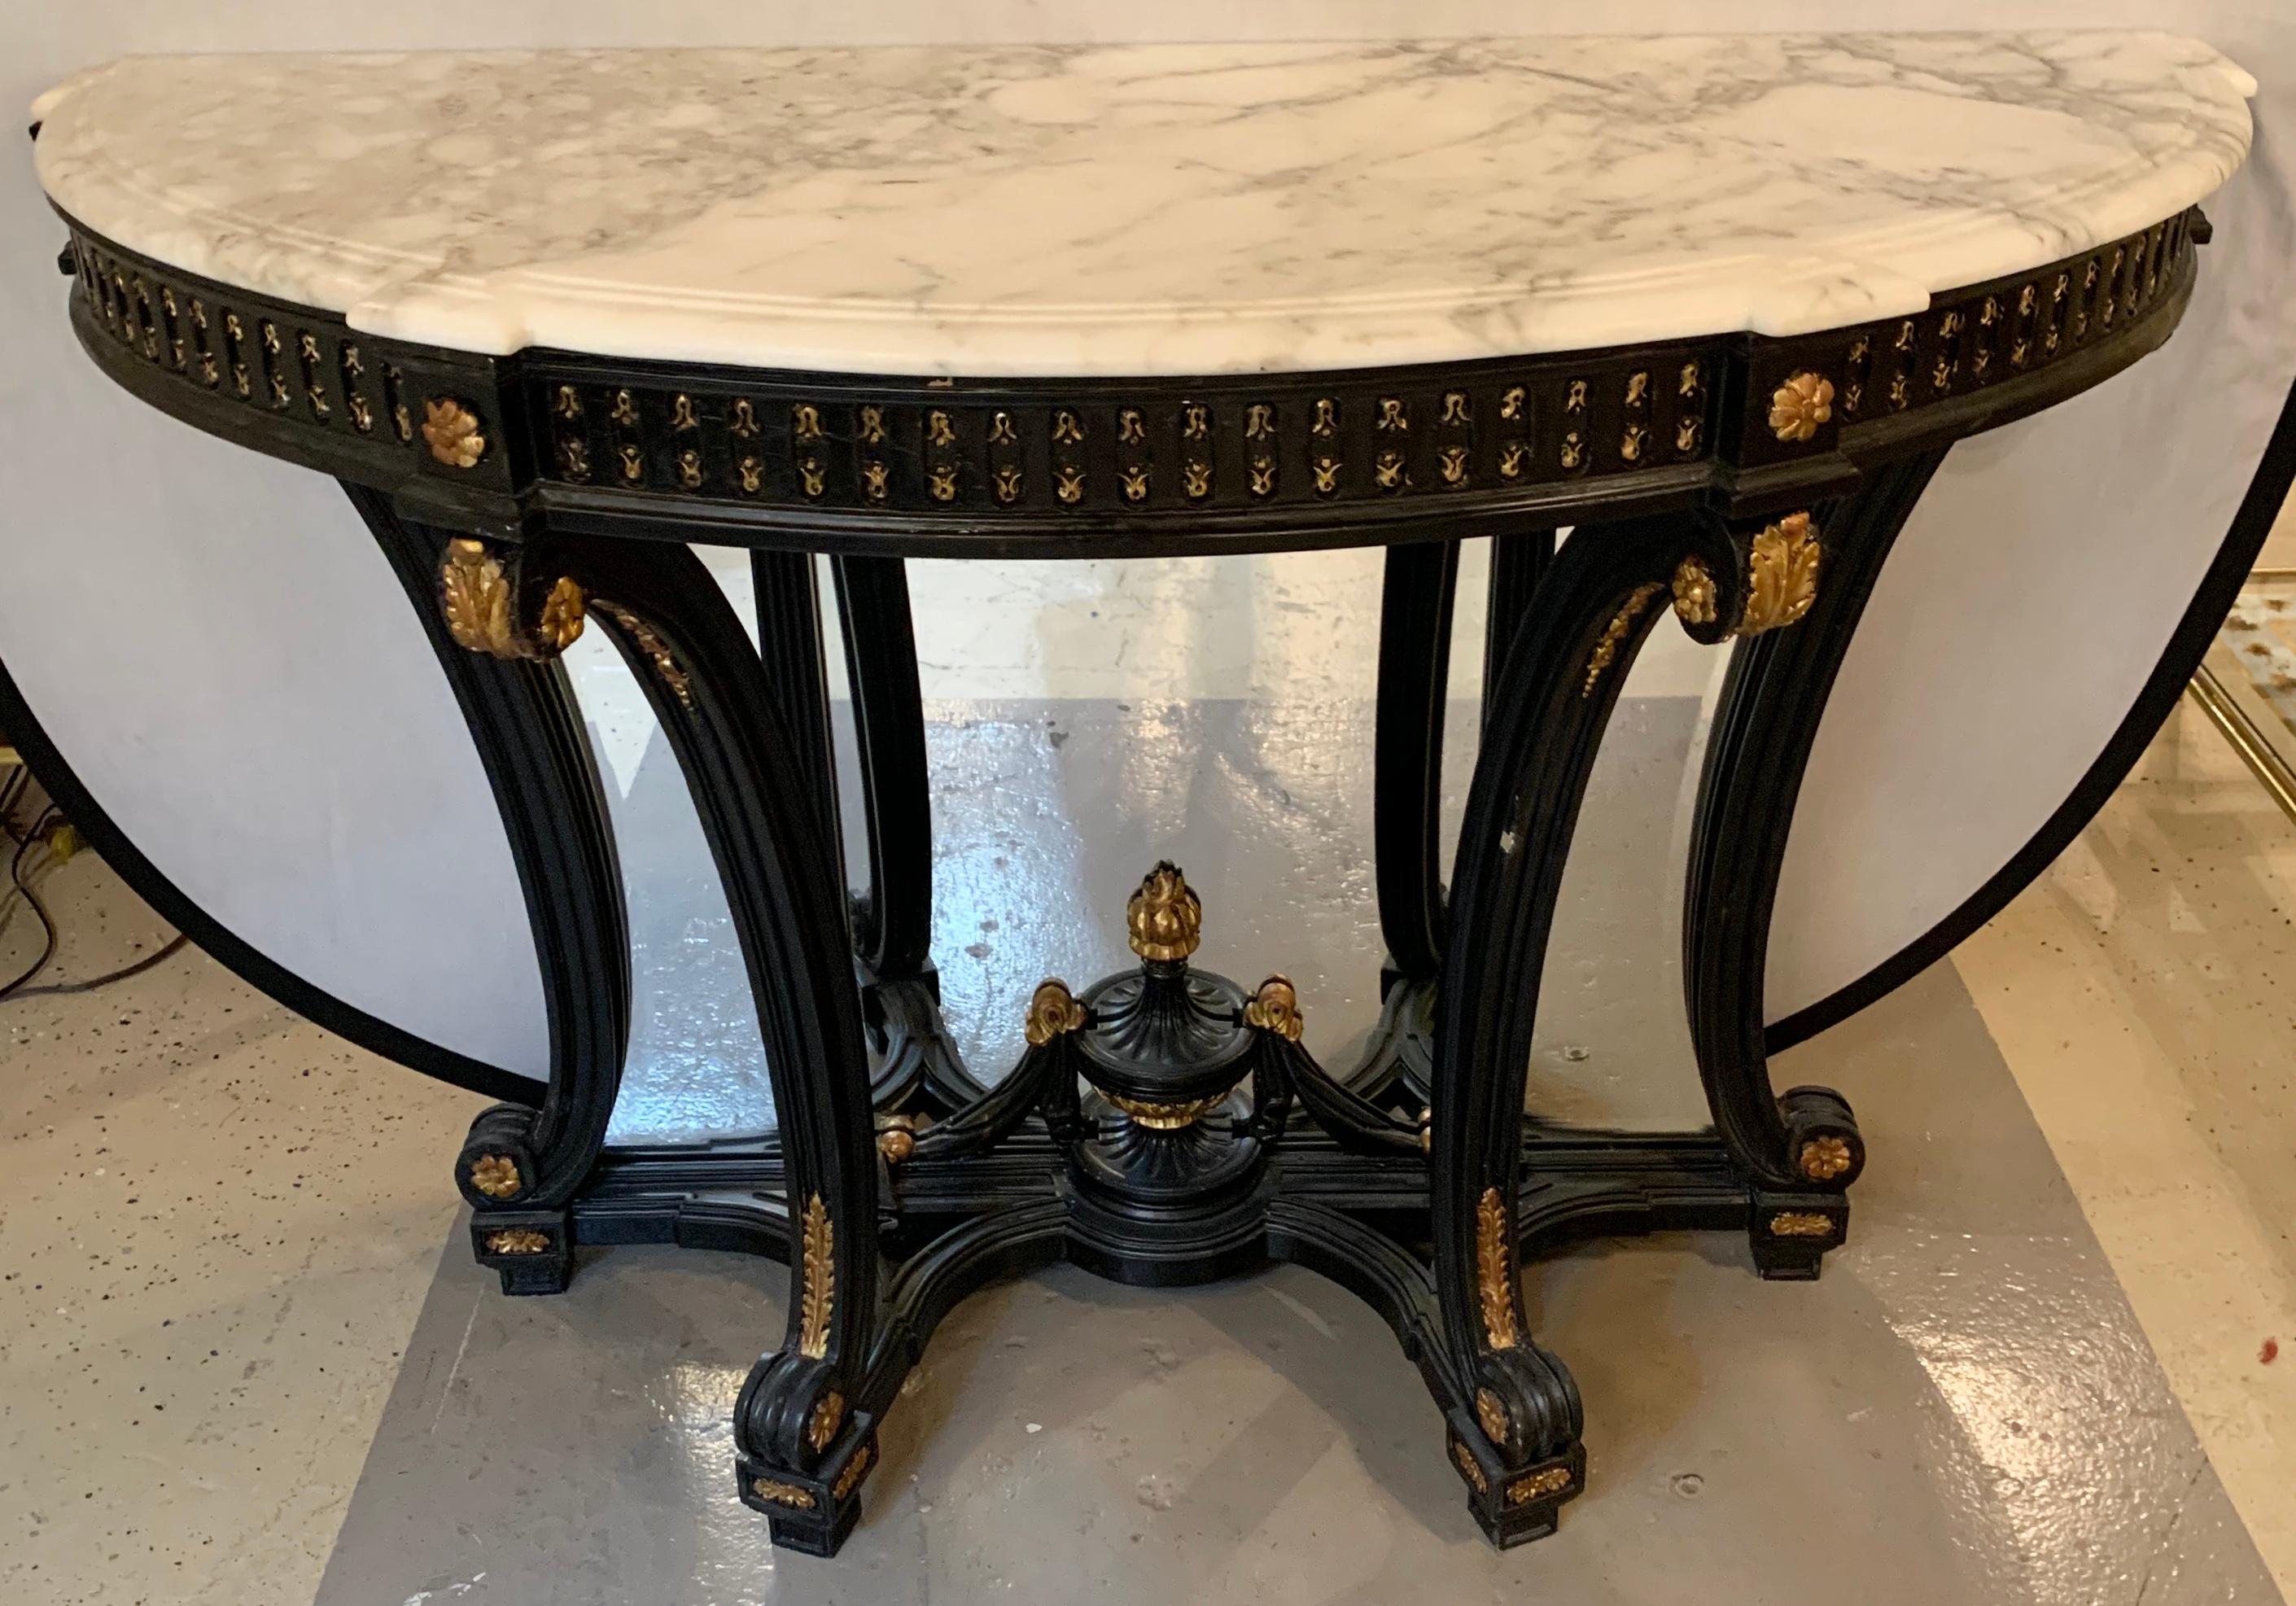 Demilune ebony and gilt Hollywood Regency style marble-top consoles or serving tables. A pair of fine custom quality parcel gilt and ebony decorated beveled mirror back console, serving or sofa tables. The pair with sprayed legs and a carved